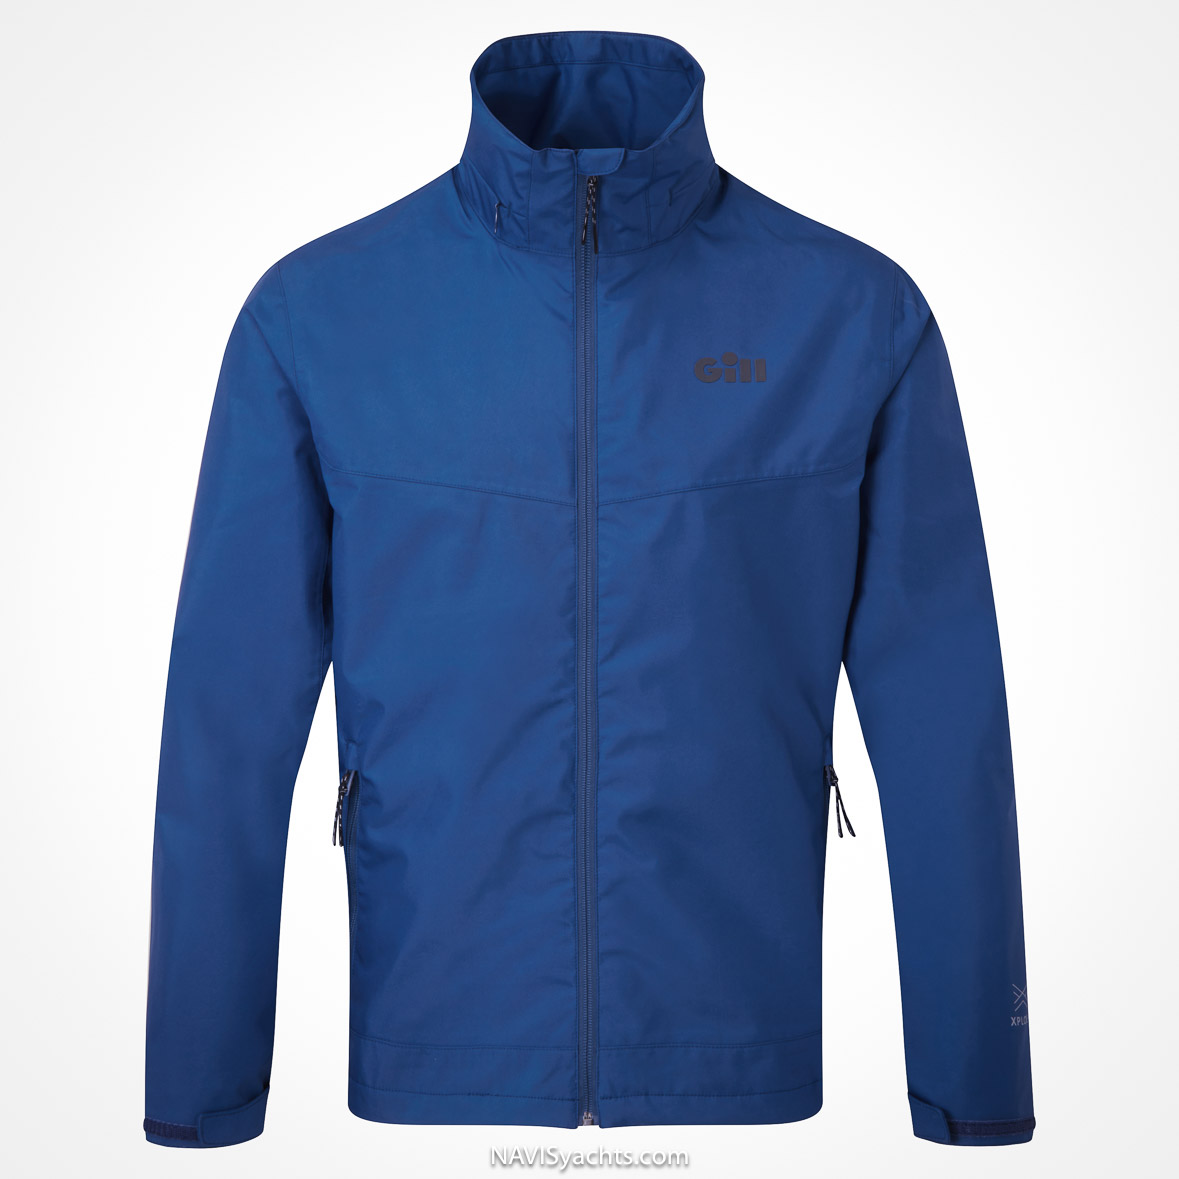 Gill's versatile Pilot Jacket with XPLORE® fabric technology, perfect for water sports and coastal adventures.